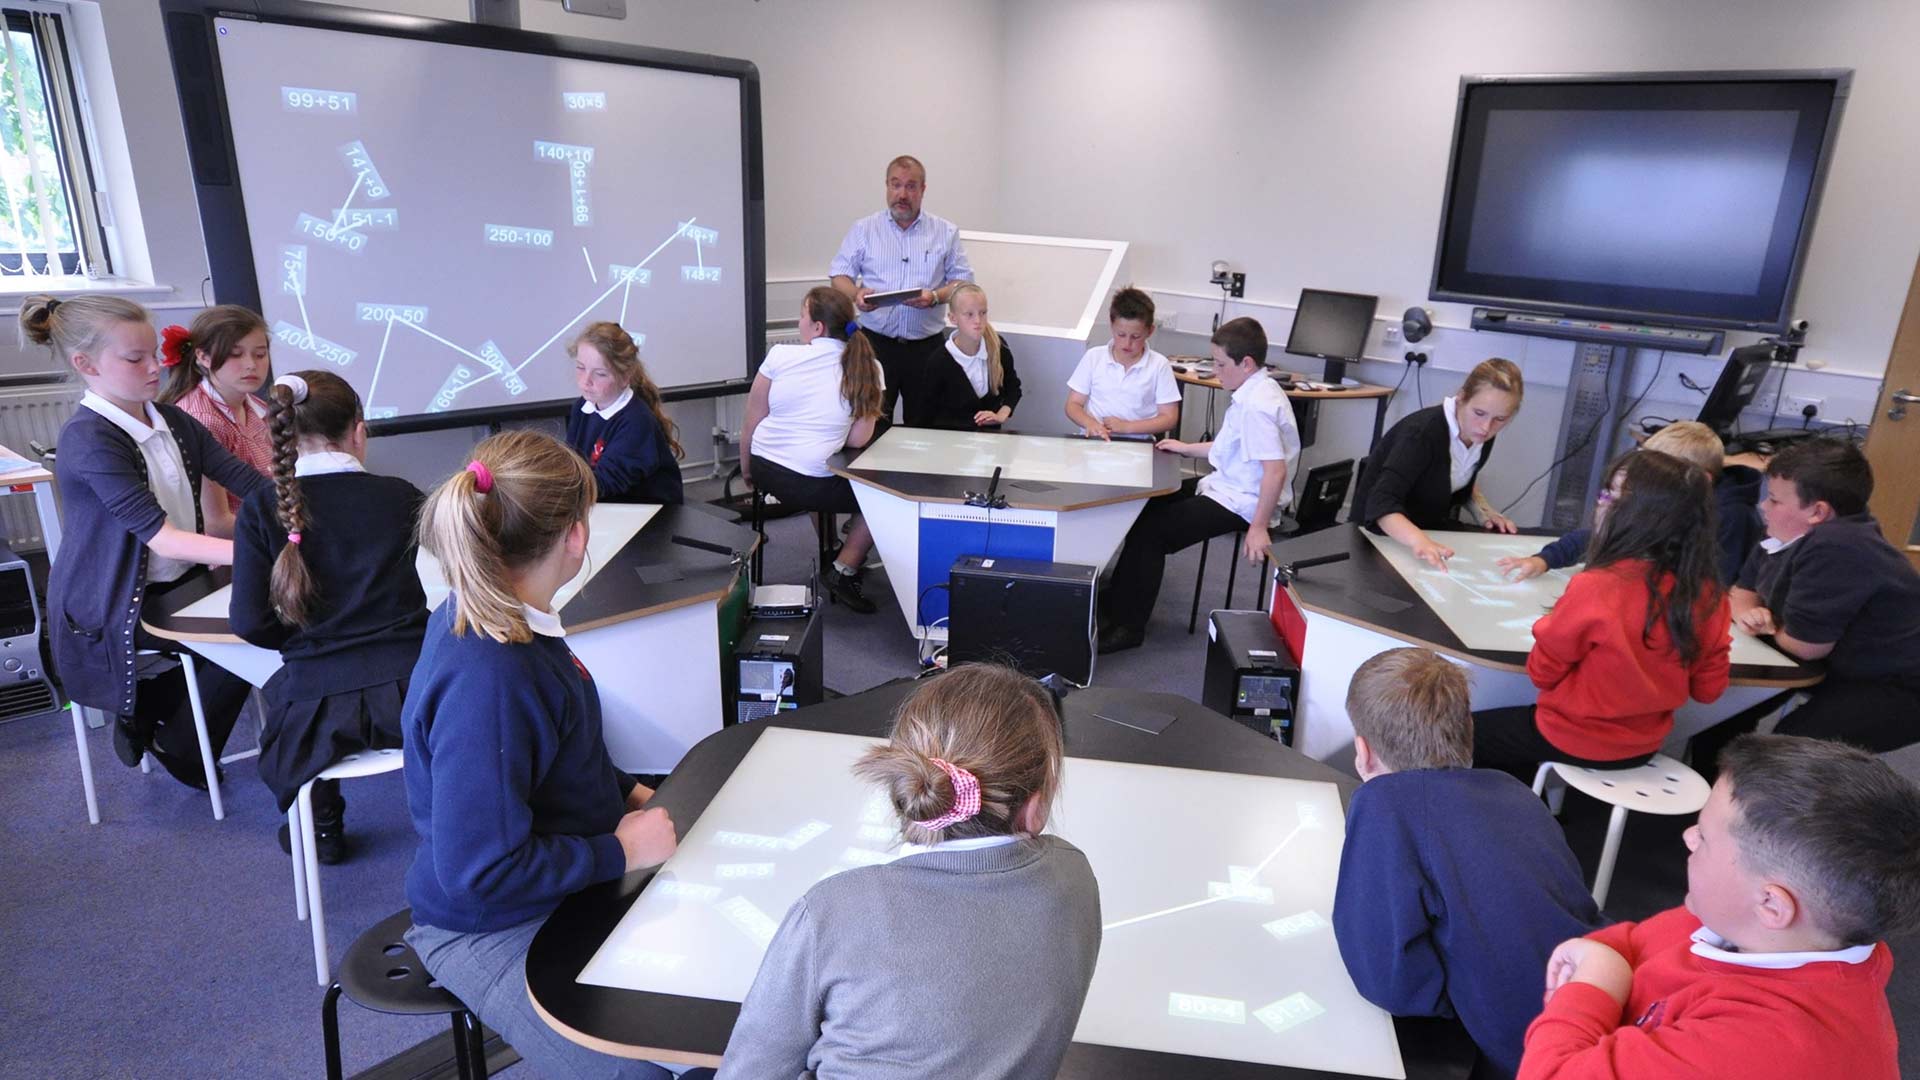 The Evolution of Technology in the Classroom